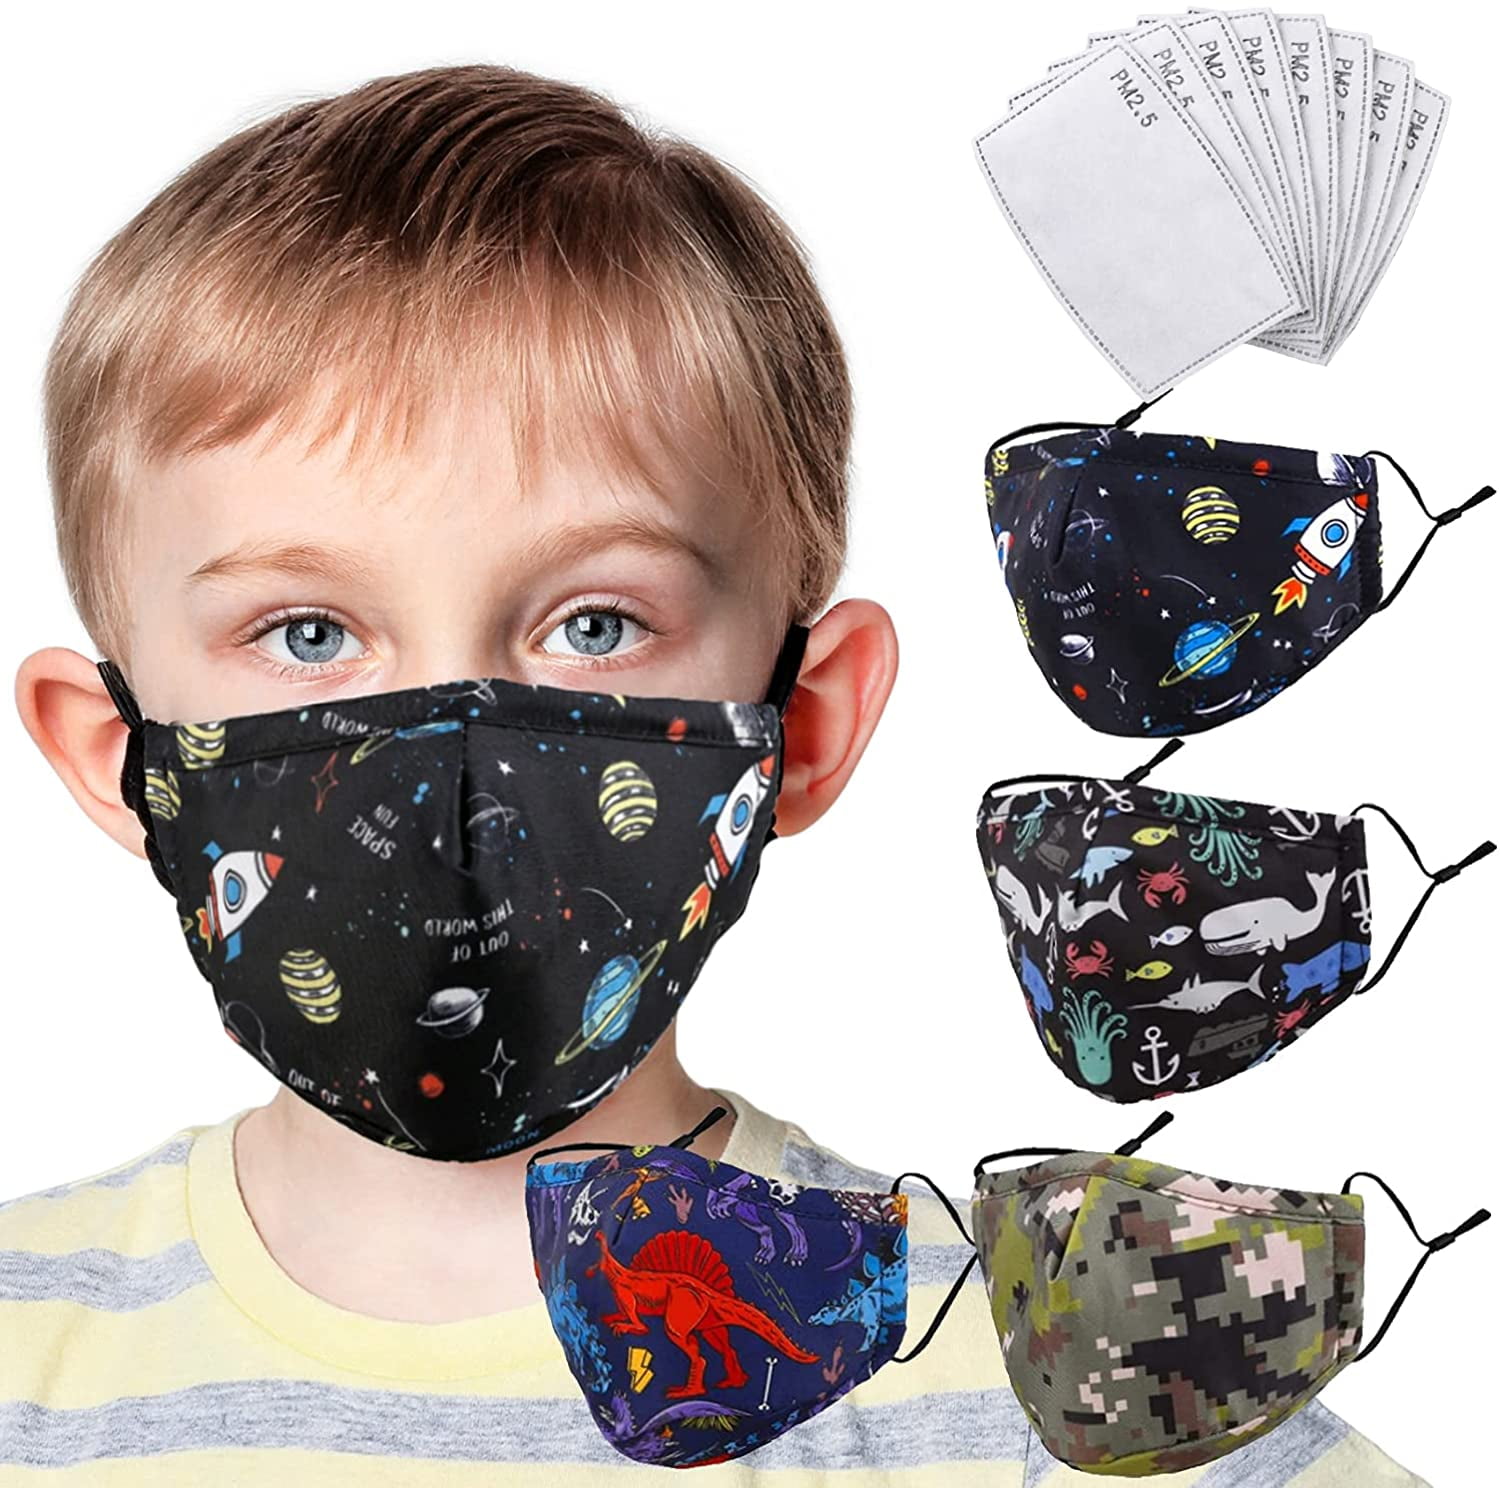 Kids Face Bandanas 3-Layer Face Protection with Ear Loops Cute Covering Breathable Anti Dust for Children School Daily Use Multicolor2-50PC 